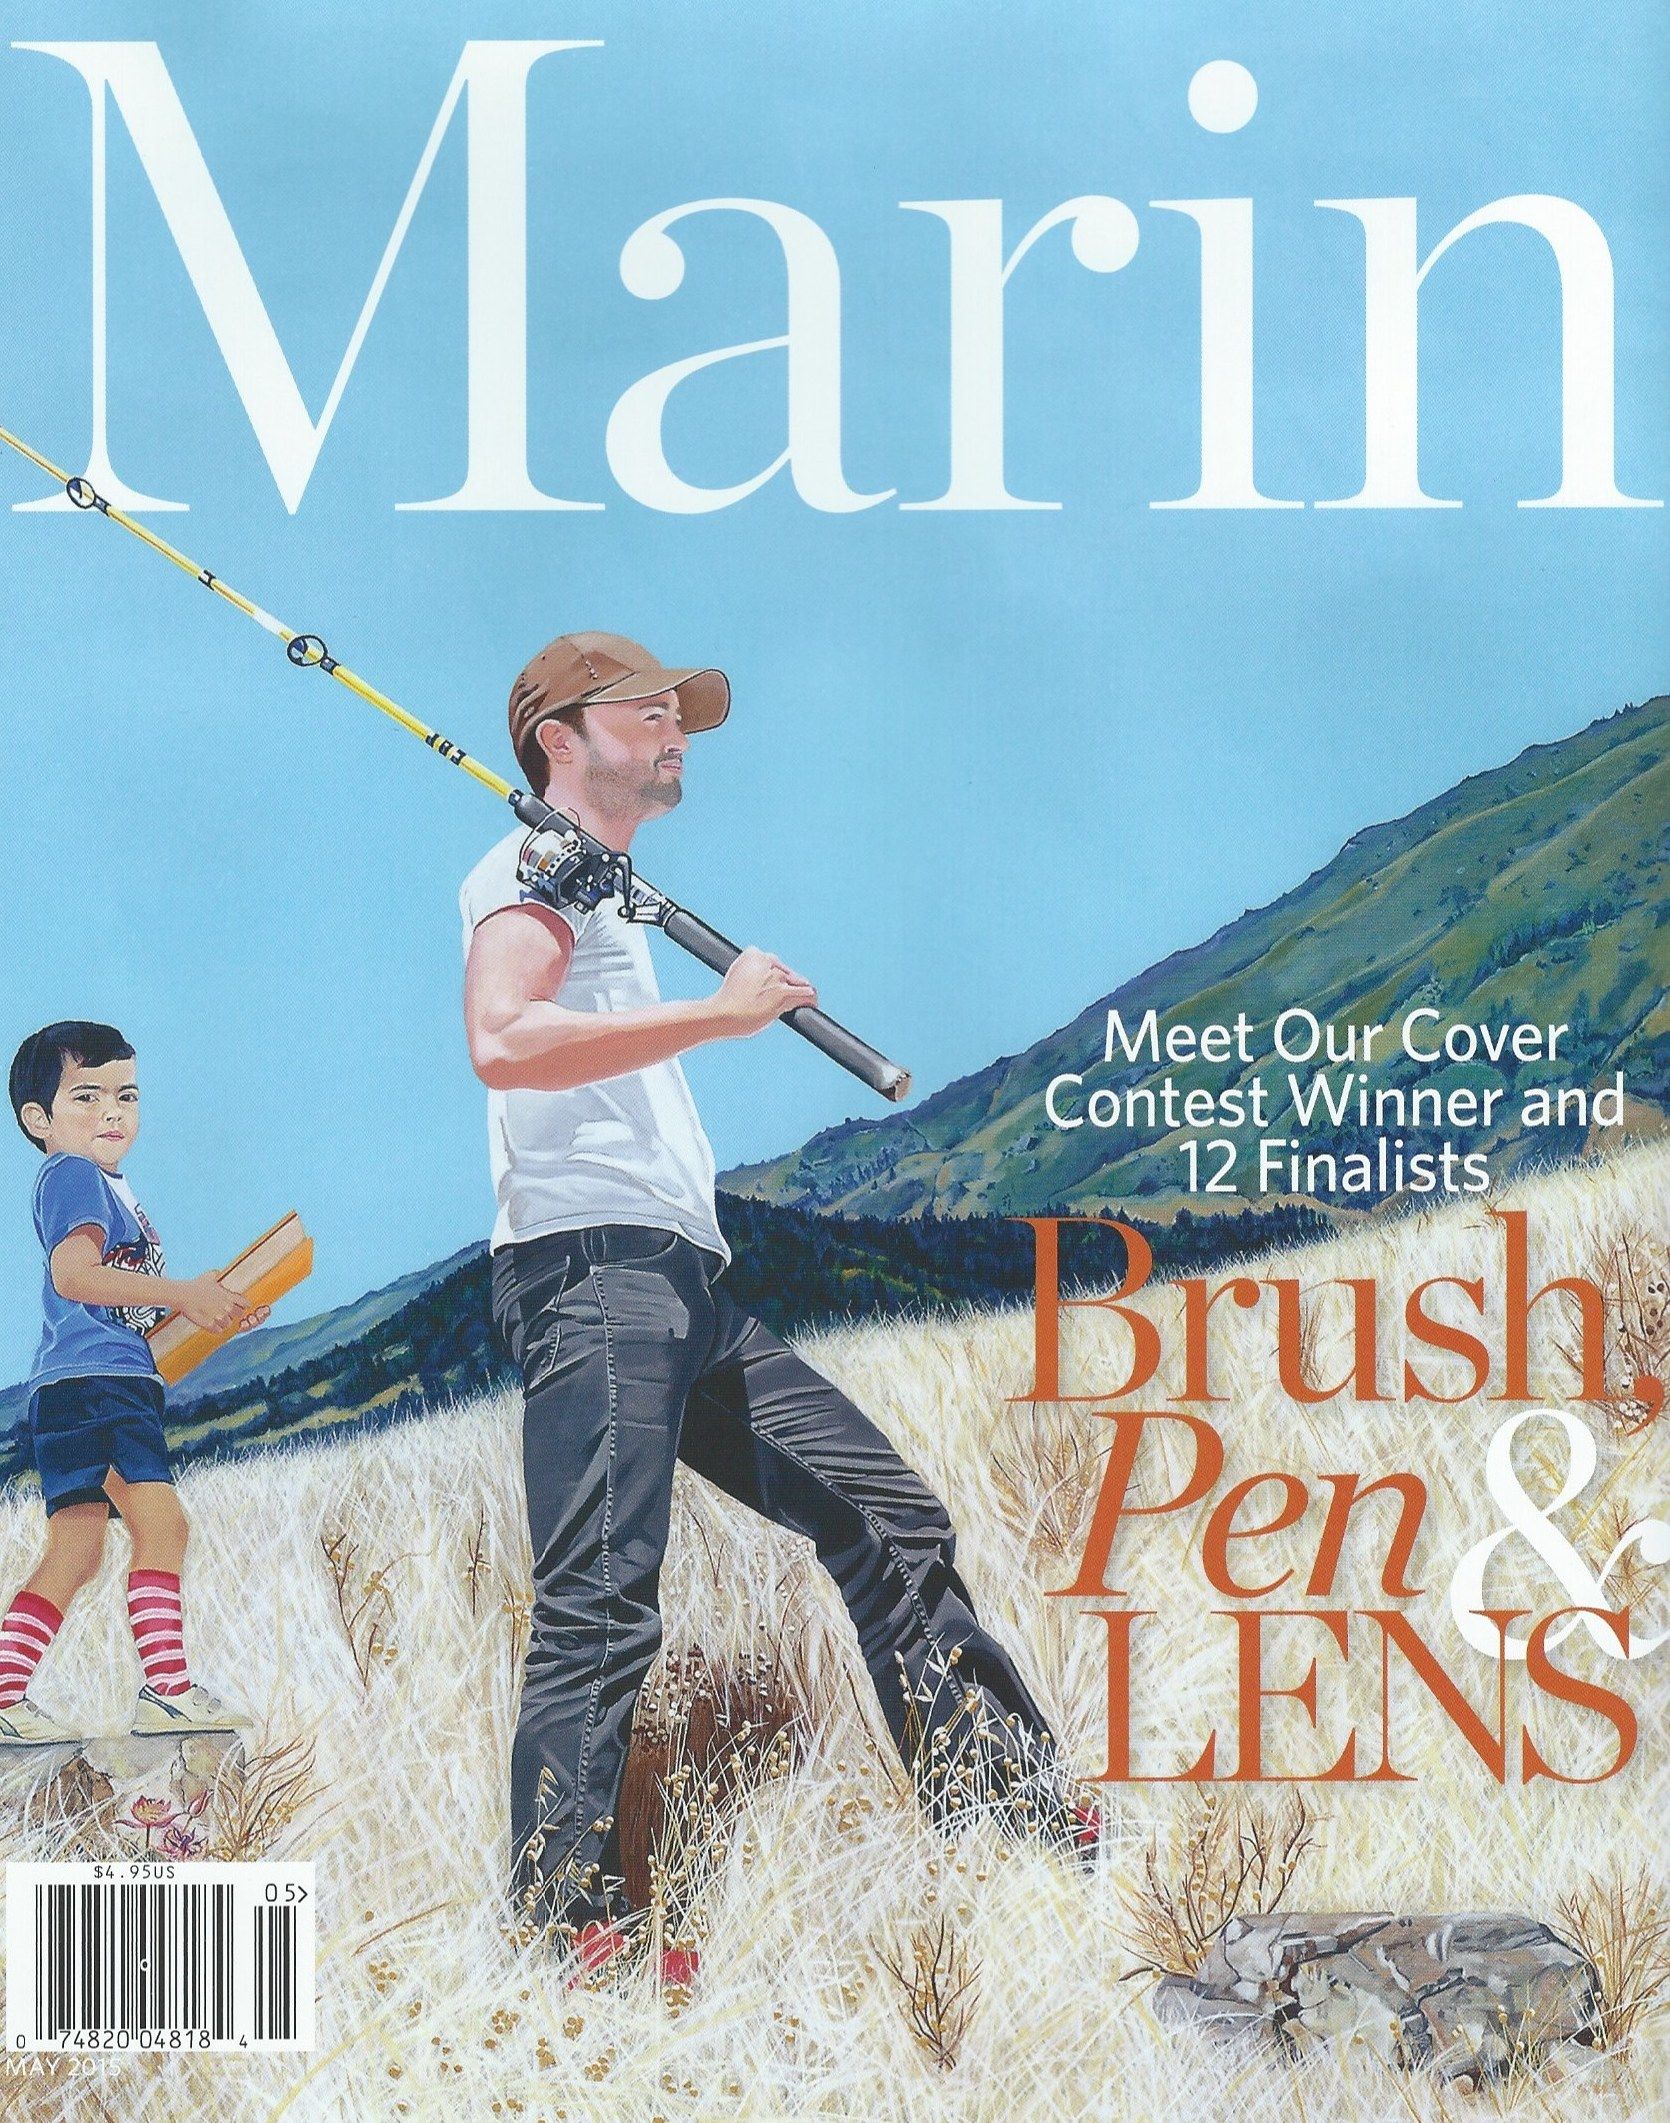 Father and Son Marin Magazine Cover, Ingrid C. Lockowandt